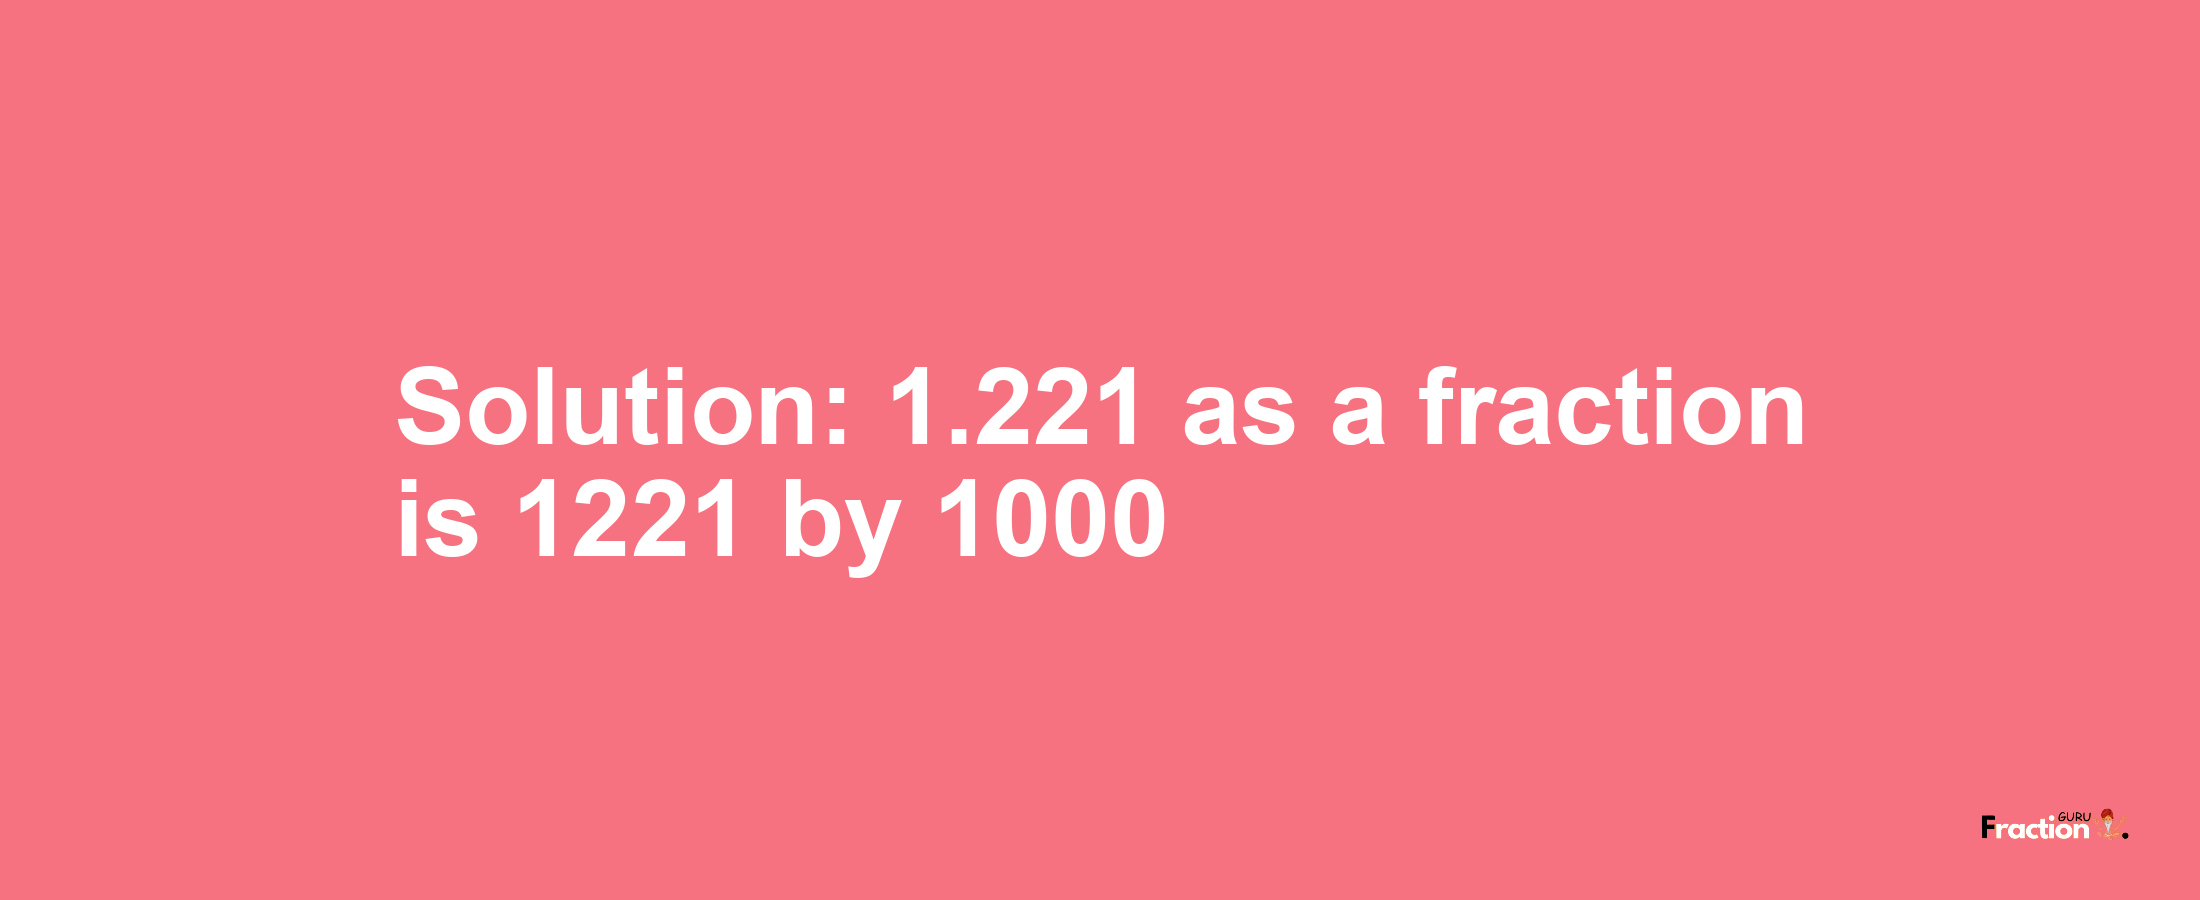 Solution:1.221 as a fraction is 1221/1000